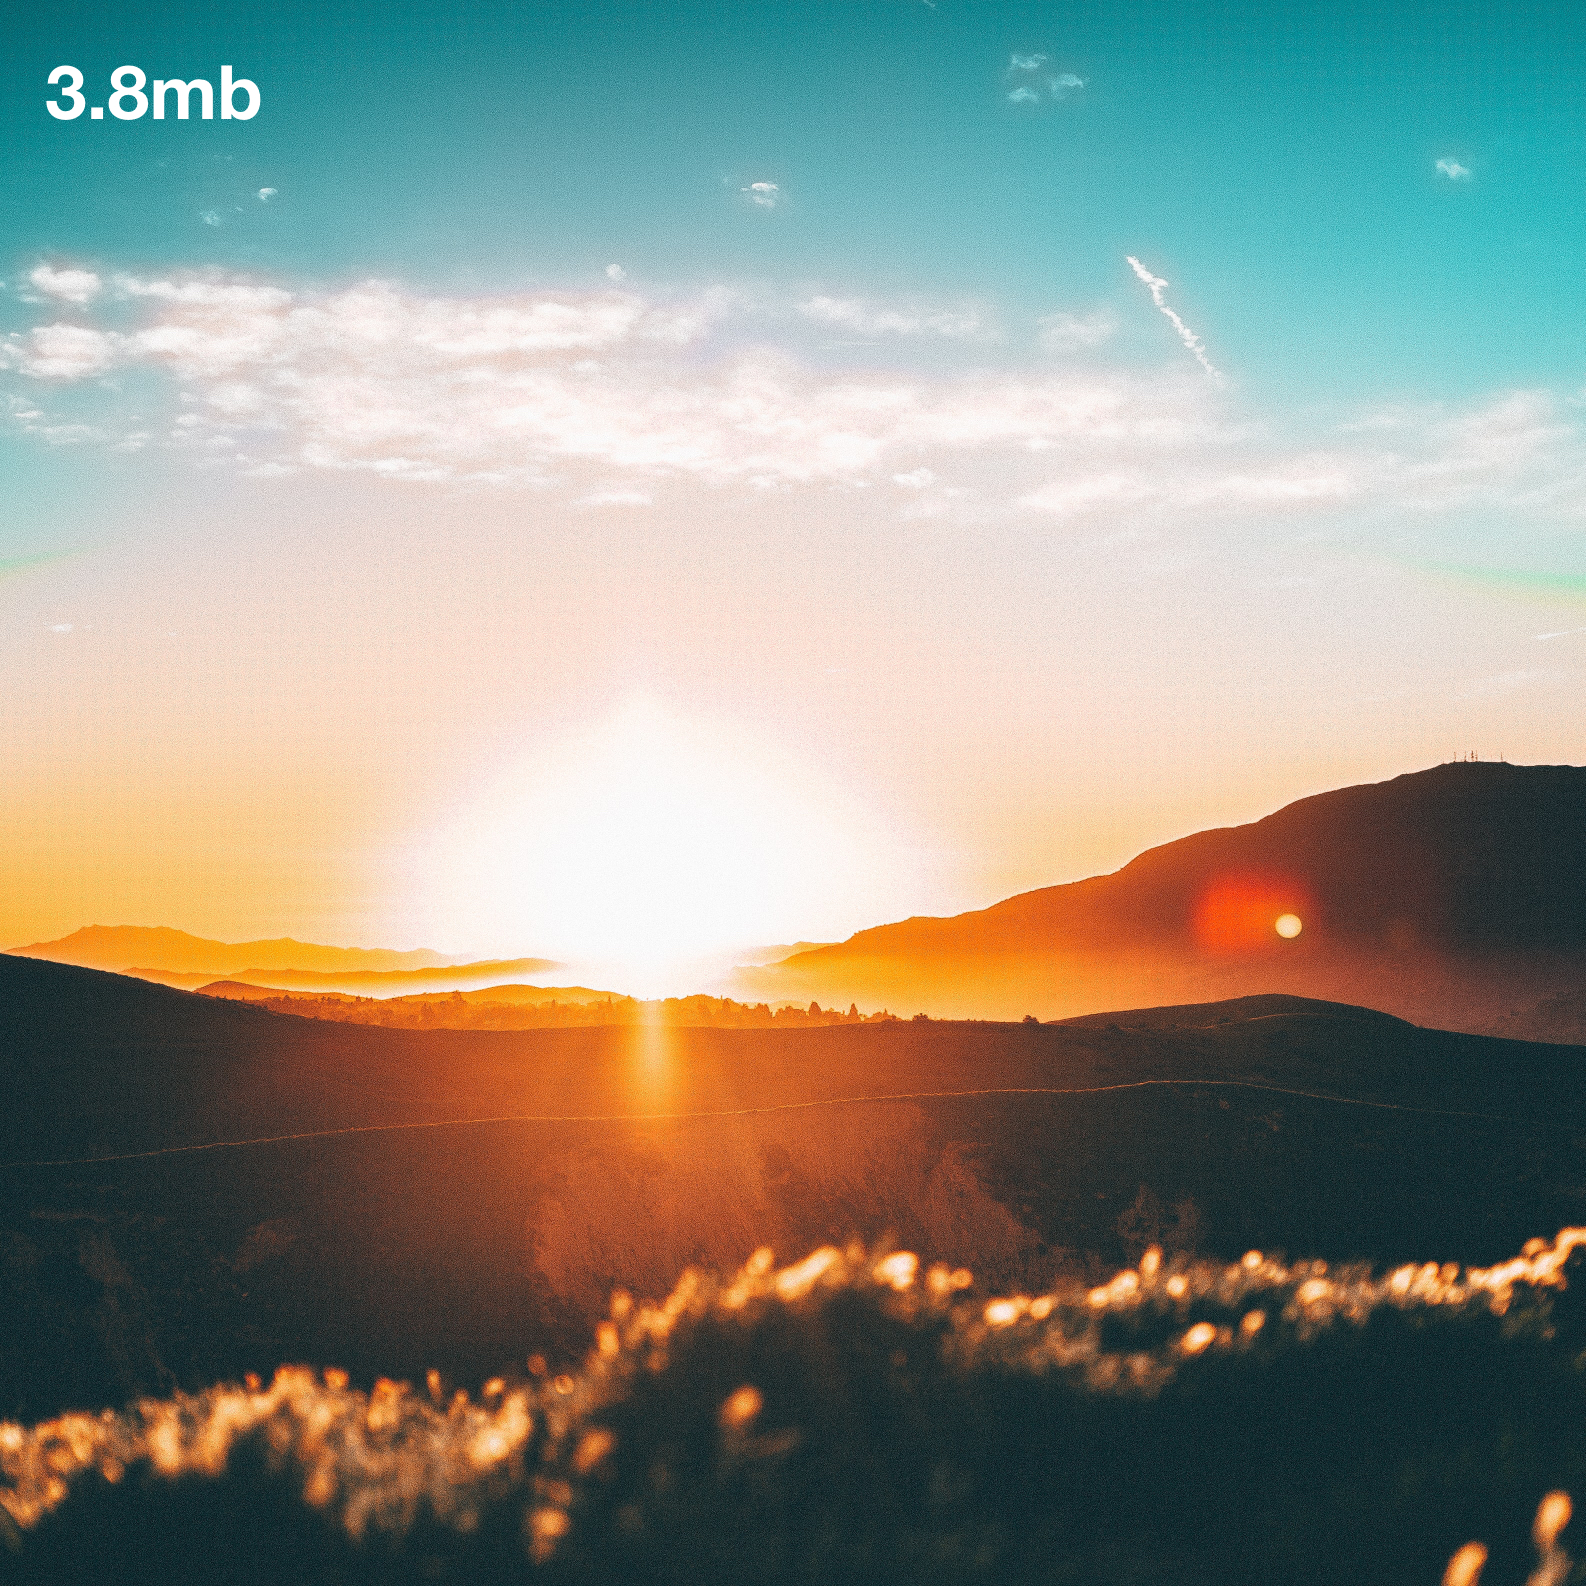 Sunset Image Example at 3.8mb